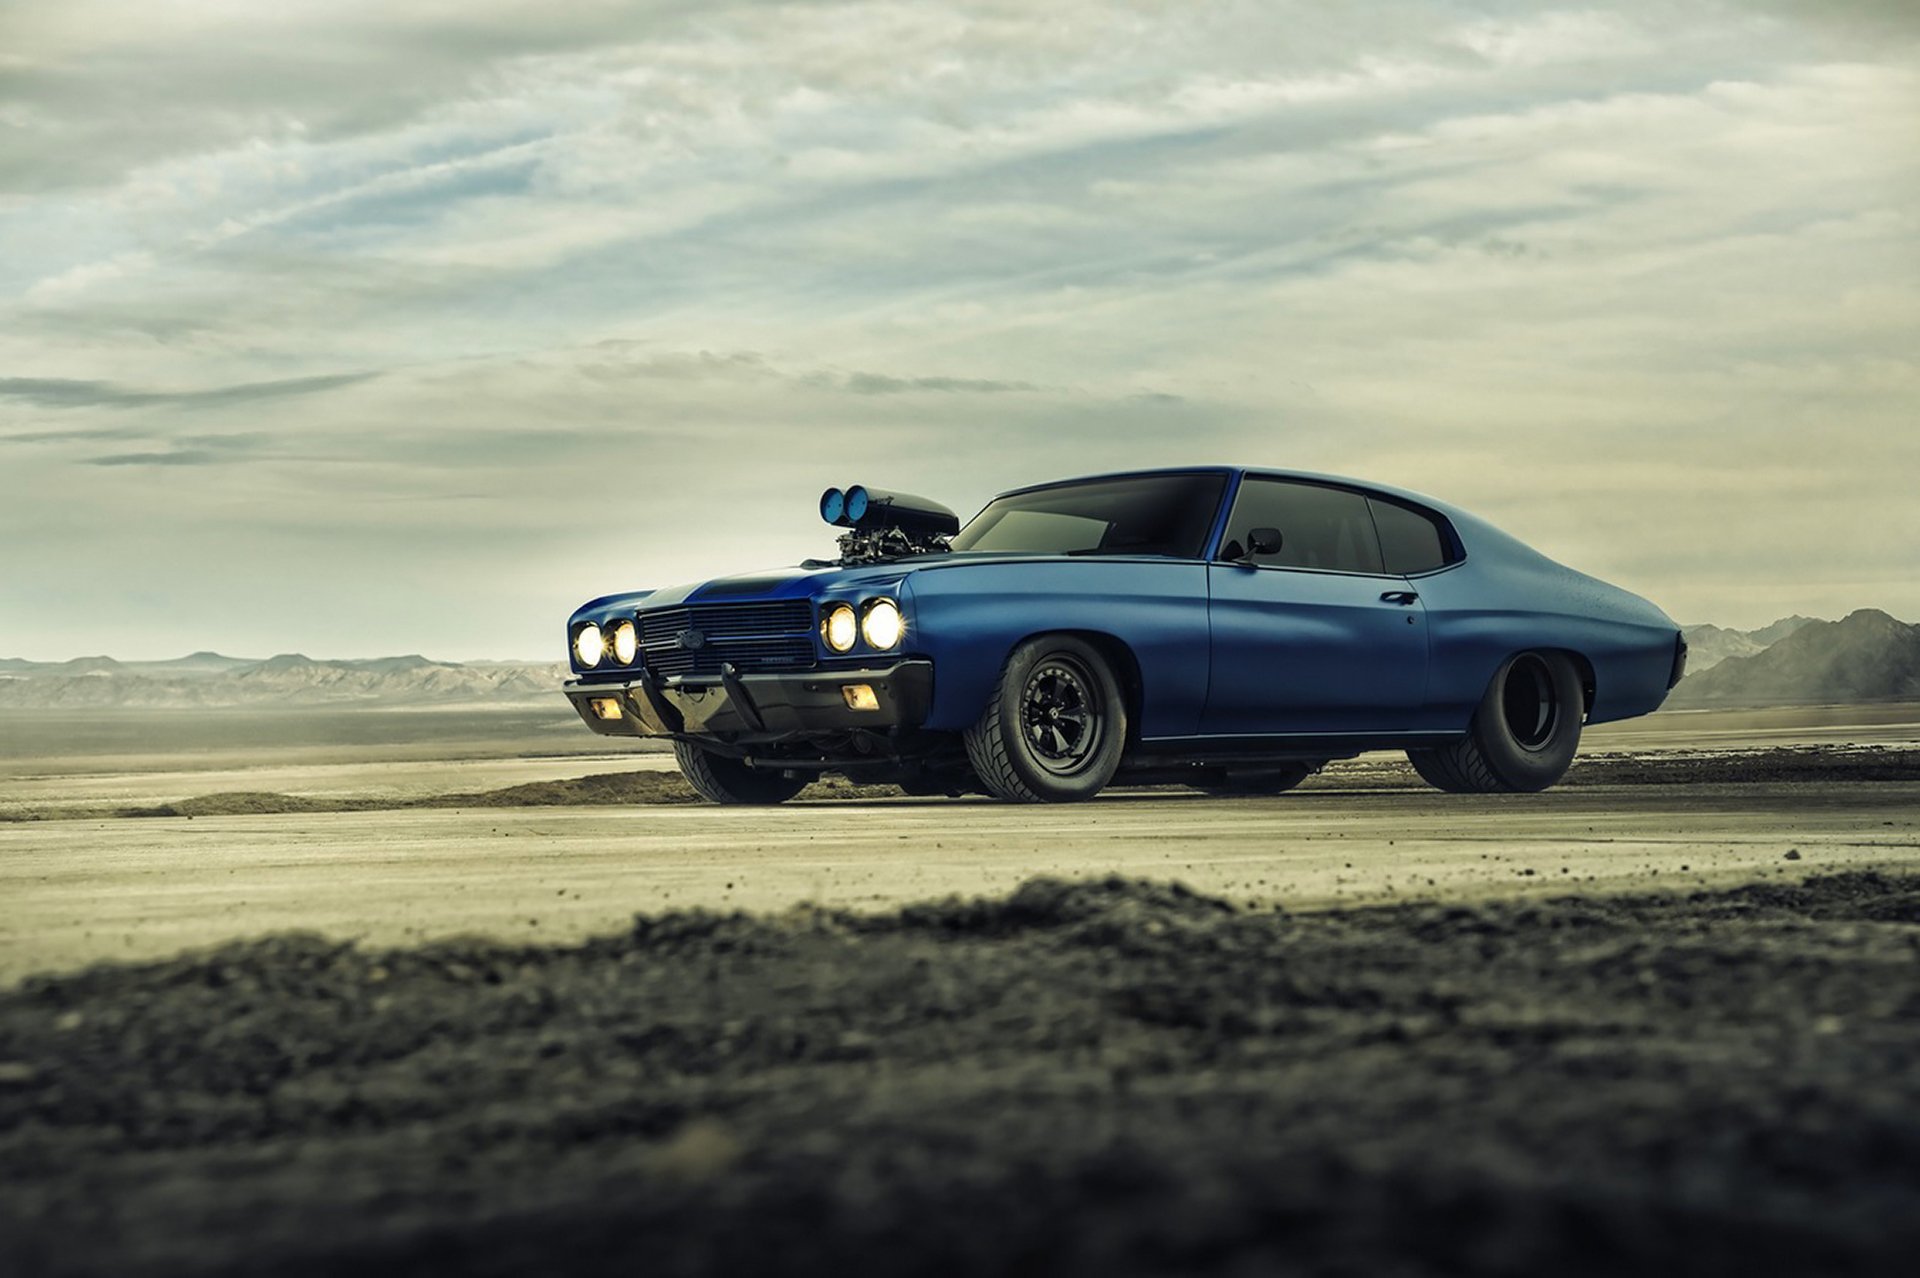 Chevrolet Chevelle Ss 1970 Supercharger Blue Dragster